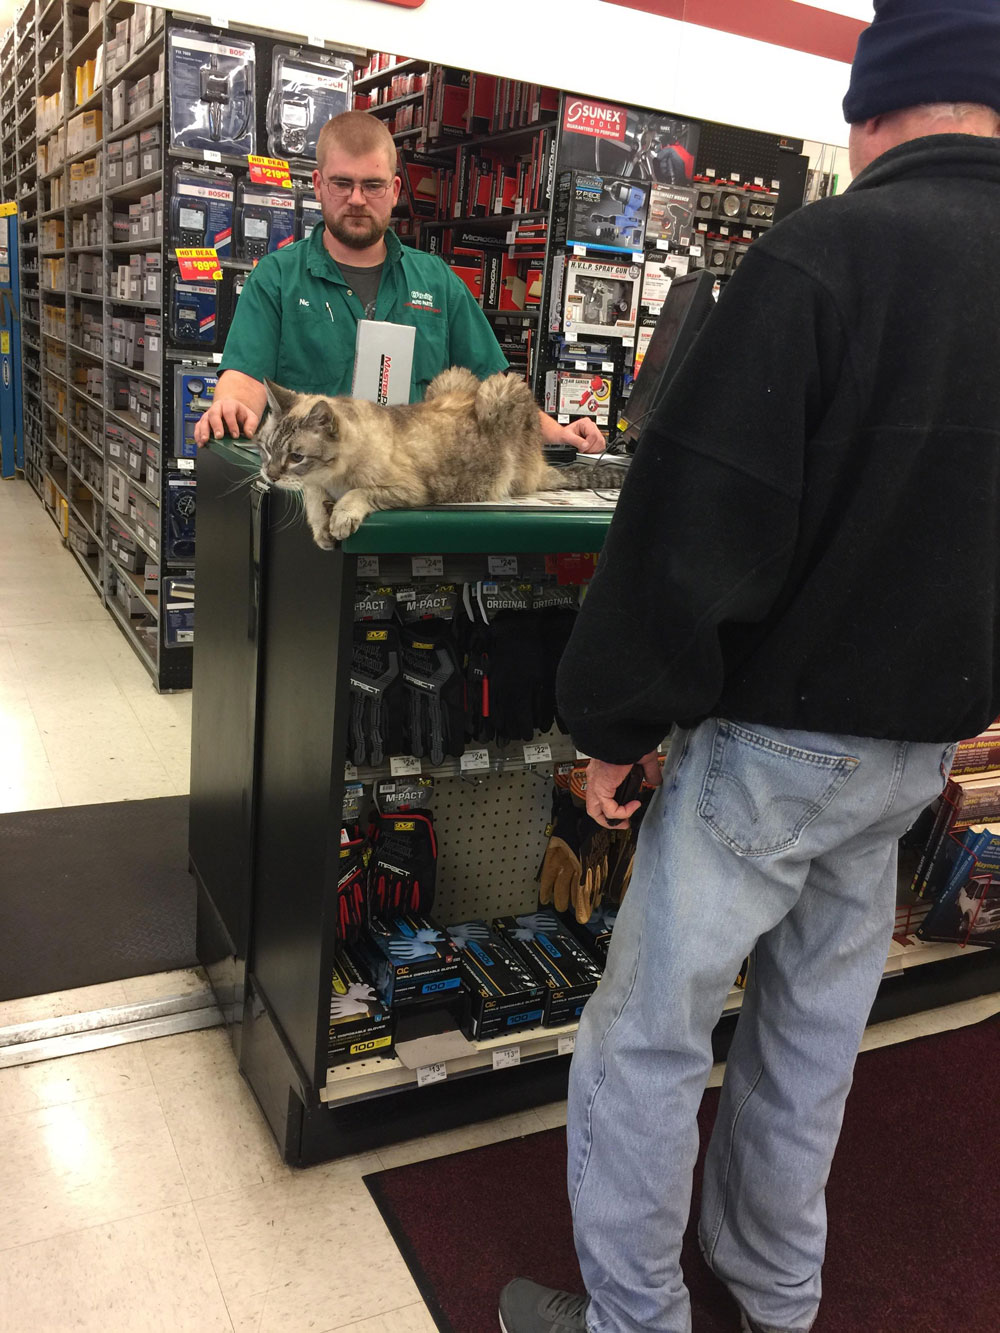 Old dude brought a giant cat into auto parts store and plopped it on counter when it was his turn